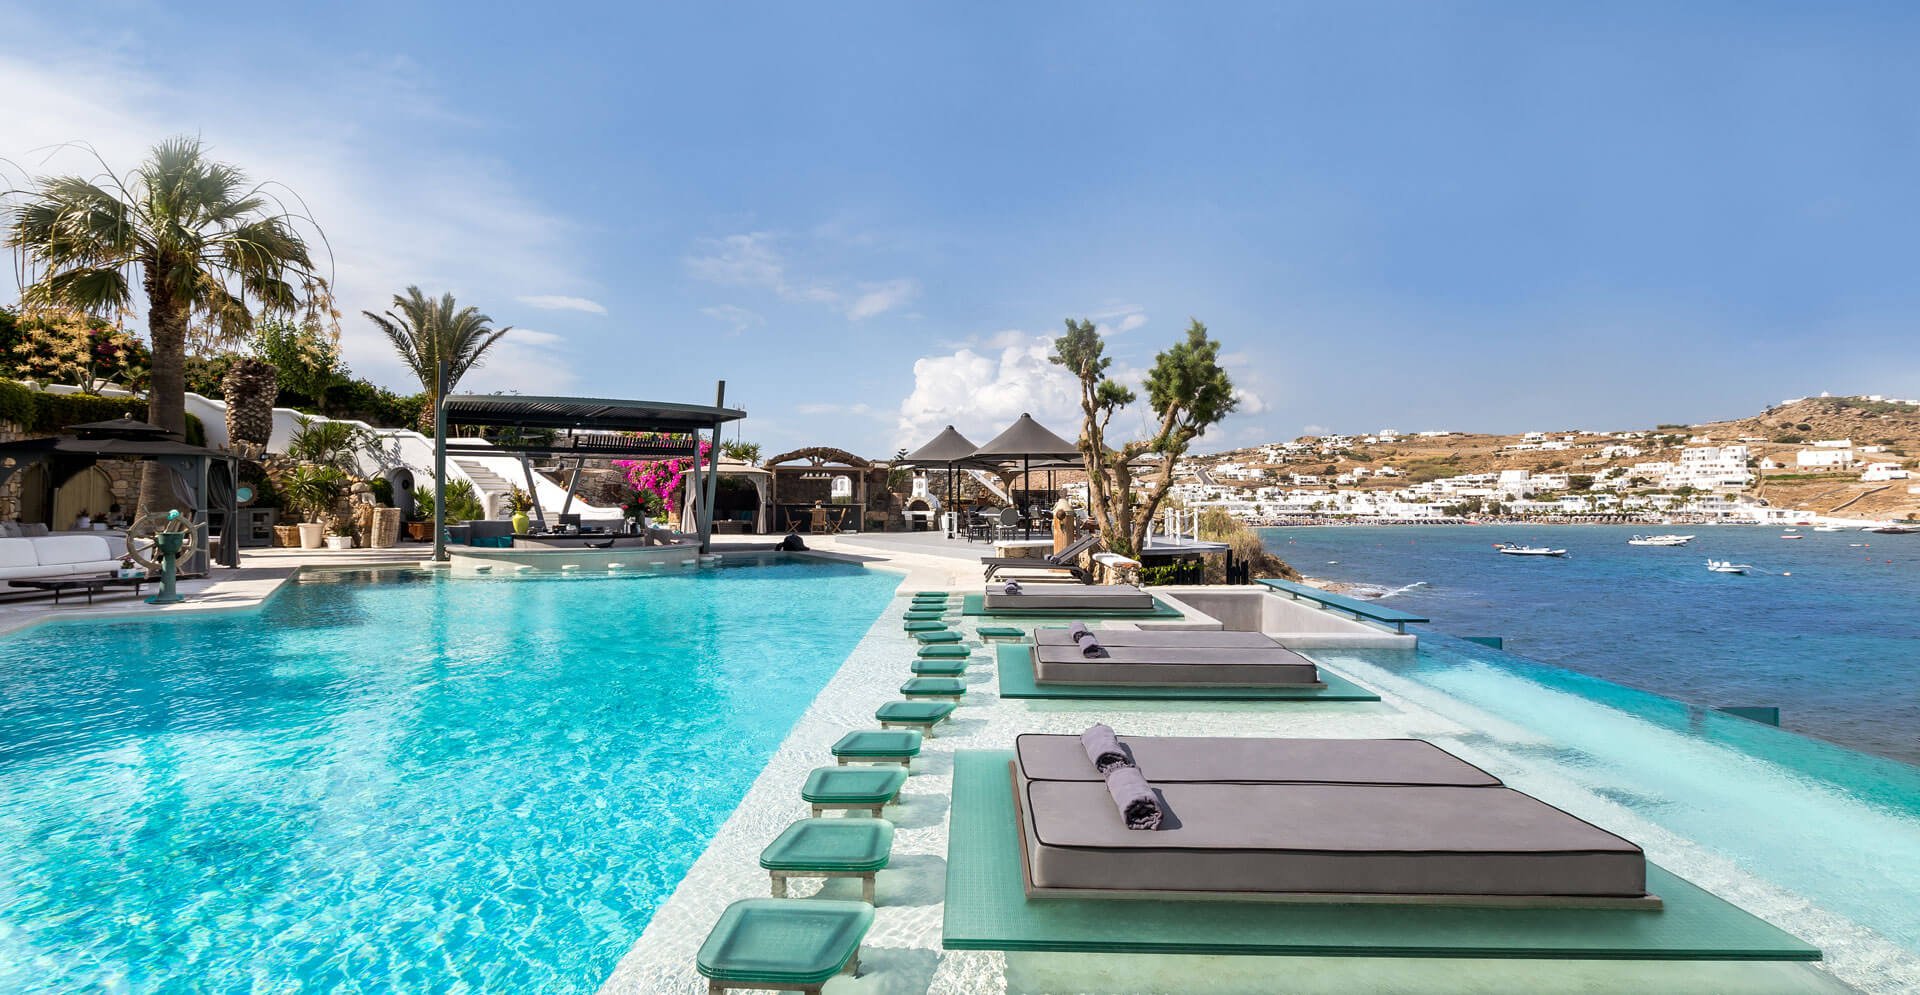 Sun-drenched Mykonos paradise: Infinity pool lined with plush sunbeds spills towards the sparkling Aegean Sea. Lush greenery and palm trees frame the picture-perfect scene.